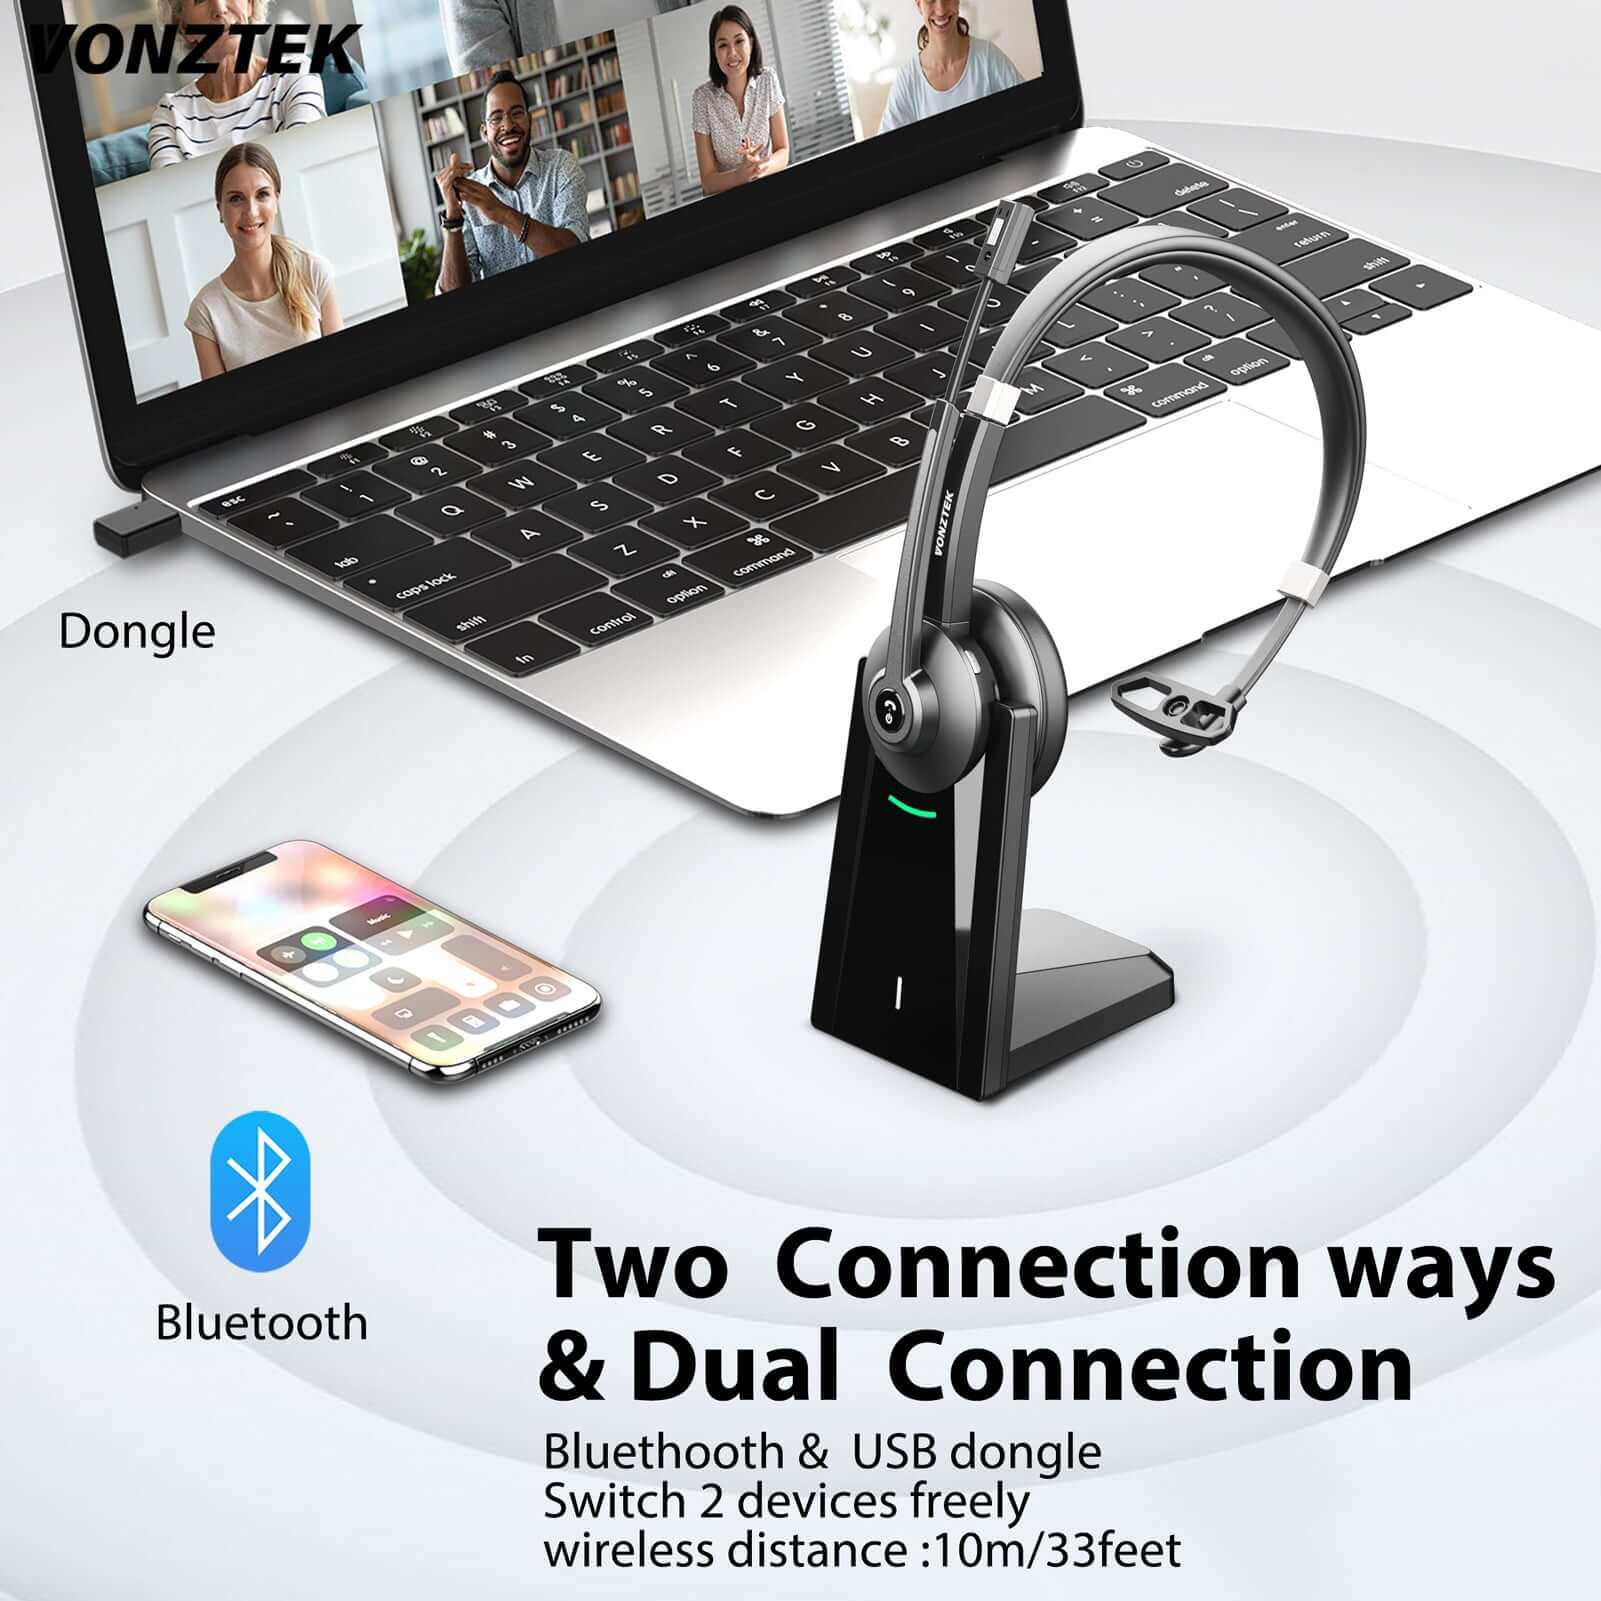 Two connection ways & dual connection,Bluetooth & USB dongle switch 2 devices freely wireless distance:10m/33 feet.